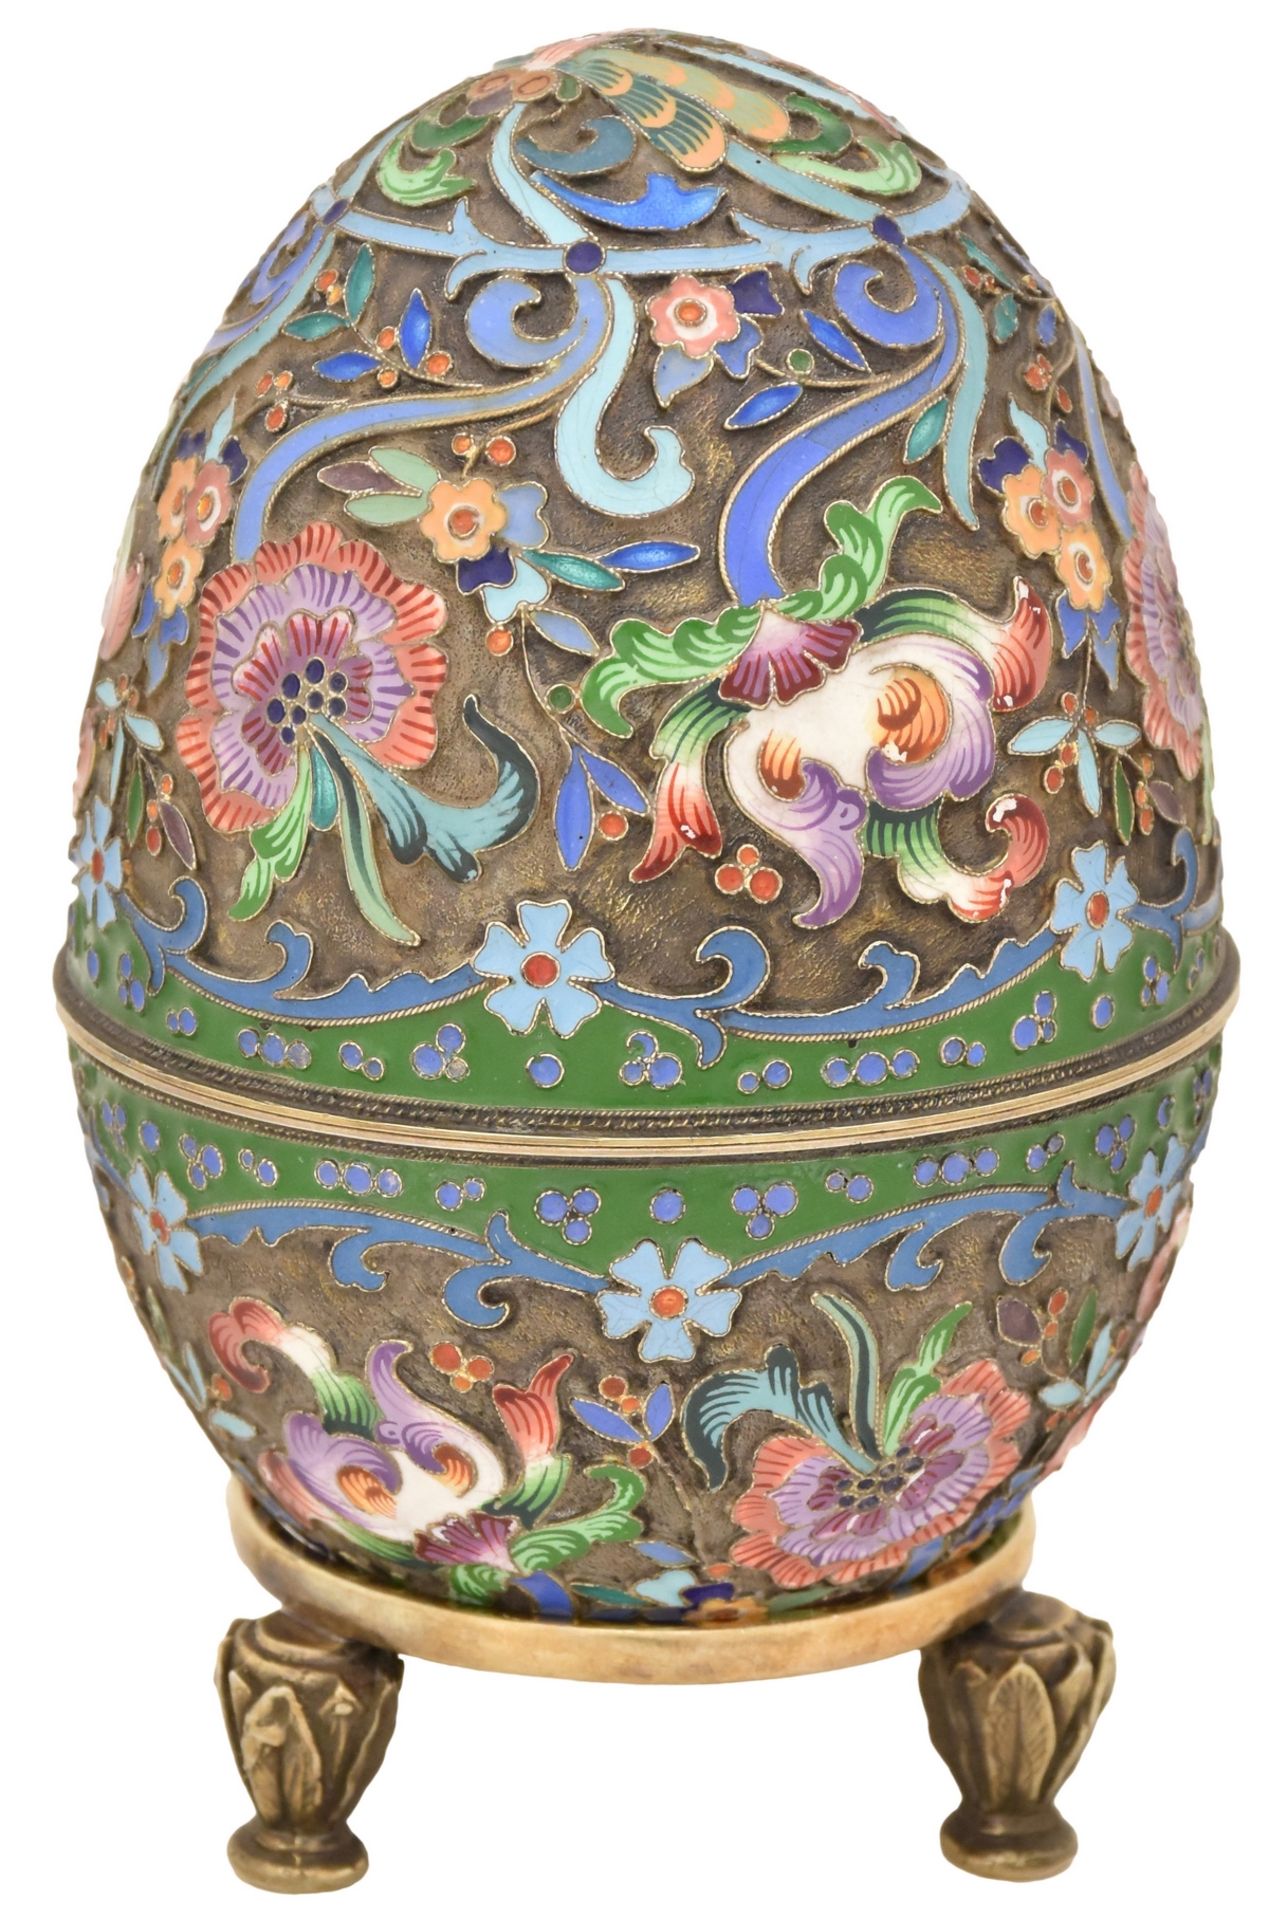 [Russian] Enamel Floral pattern Easter egg. Russia, Moscow. Circa 1910. 11x7 cm (egg). - Image 2 of 6